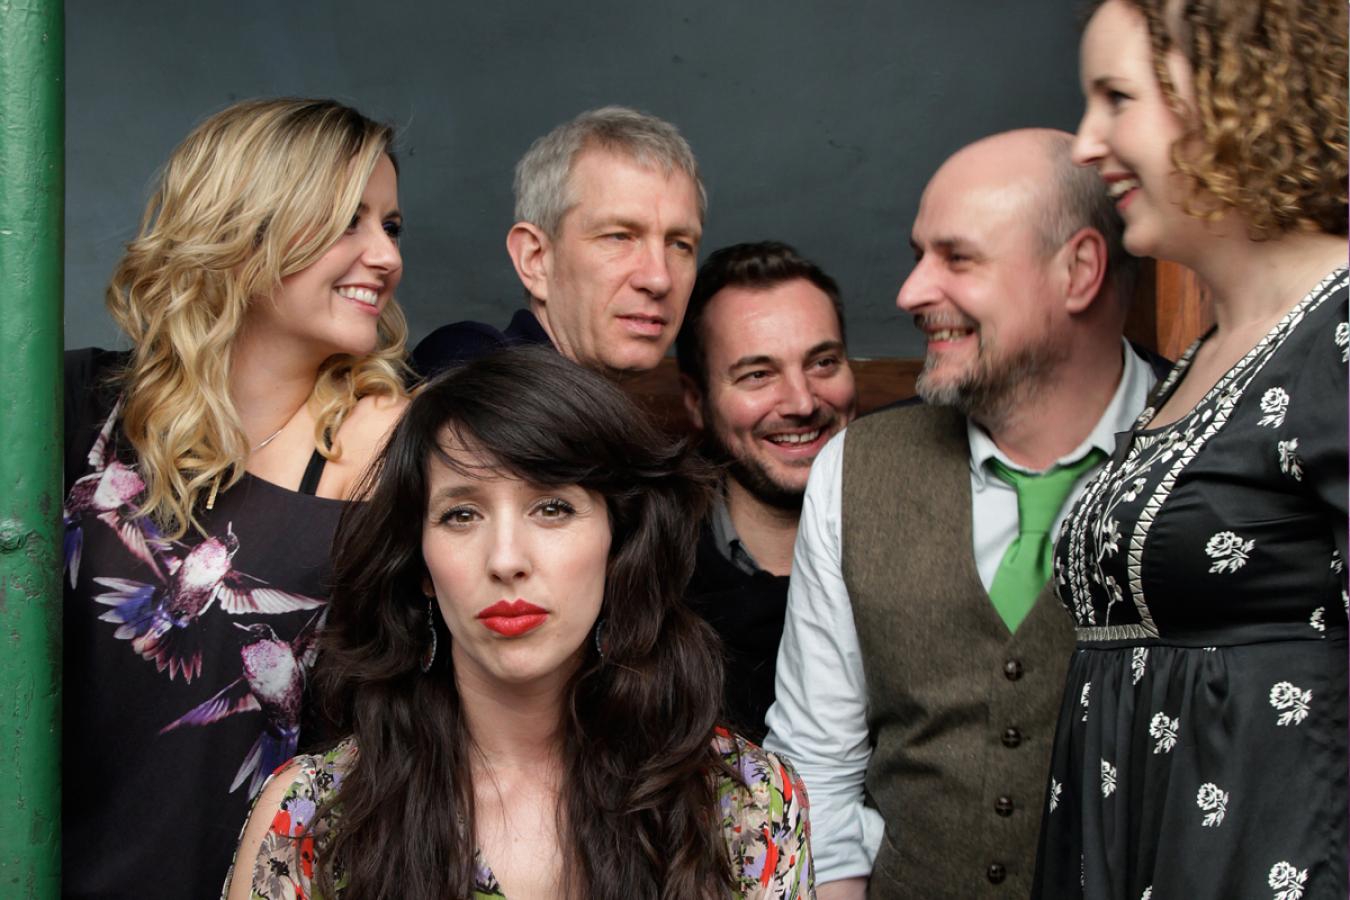 Bellowhead will be headlining Cardigan Castle's official opening concert